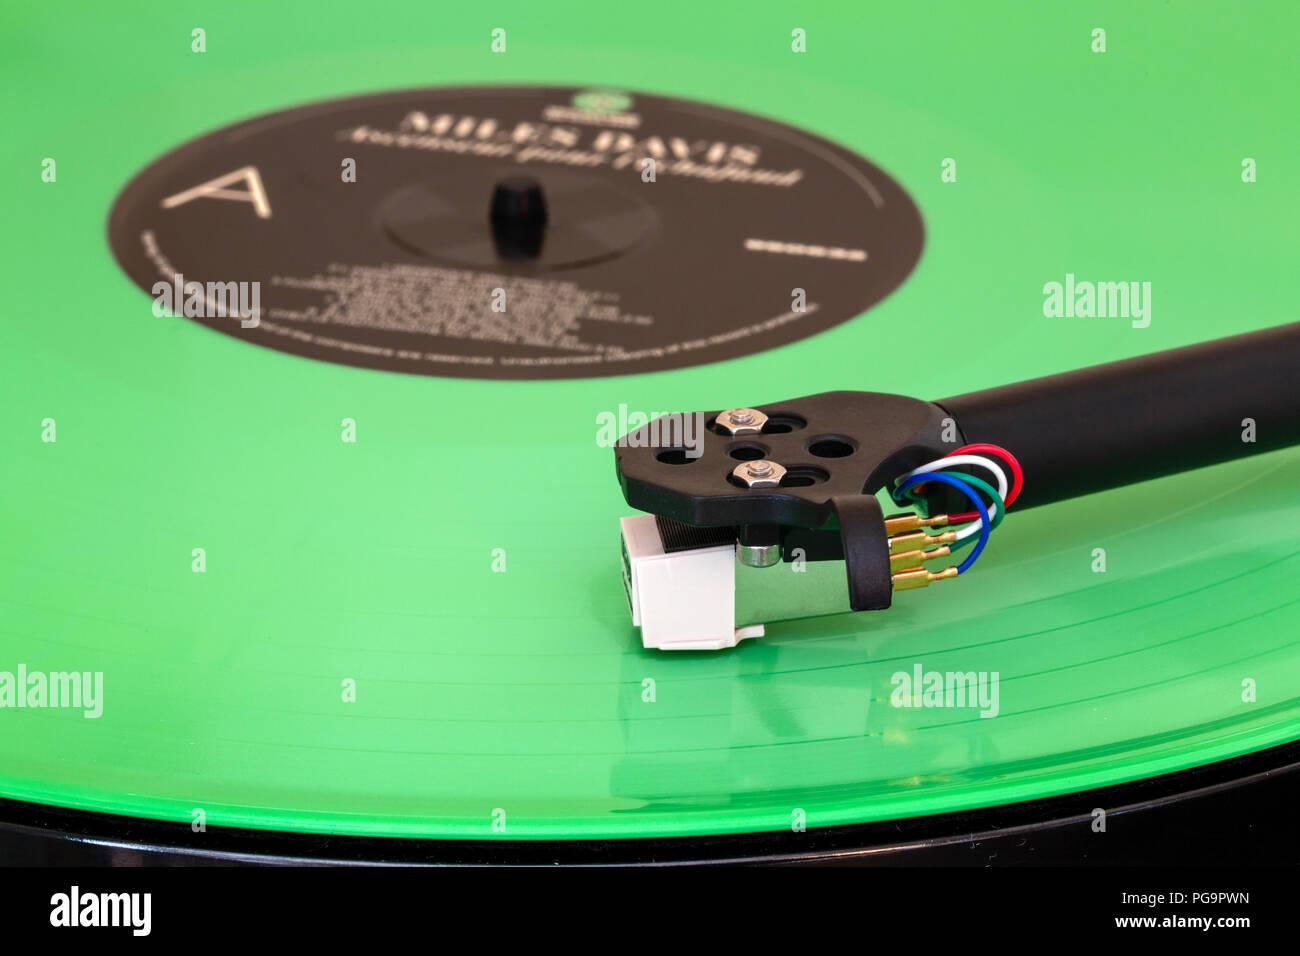 Hifi turntable with tonearm, cartridge and stylus playing on color vinyl record Stock Photo